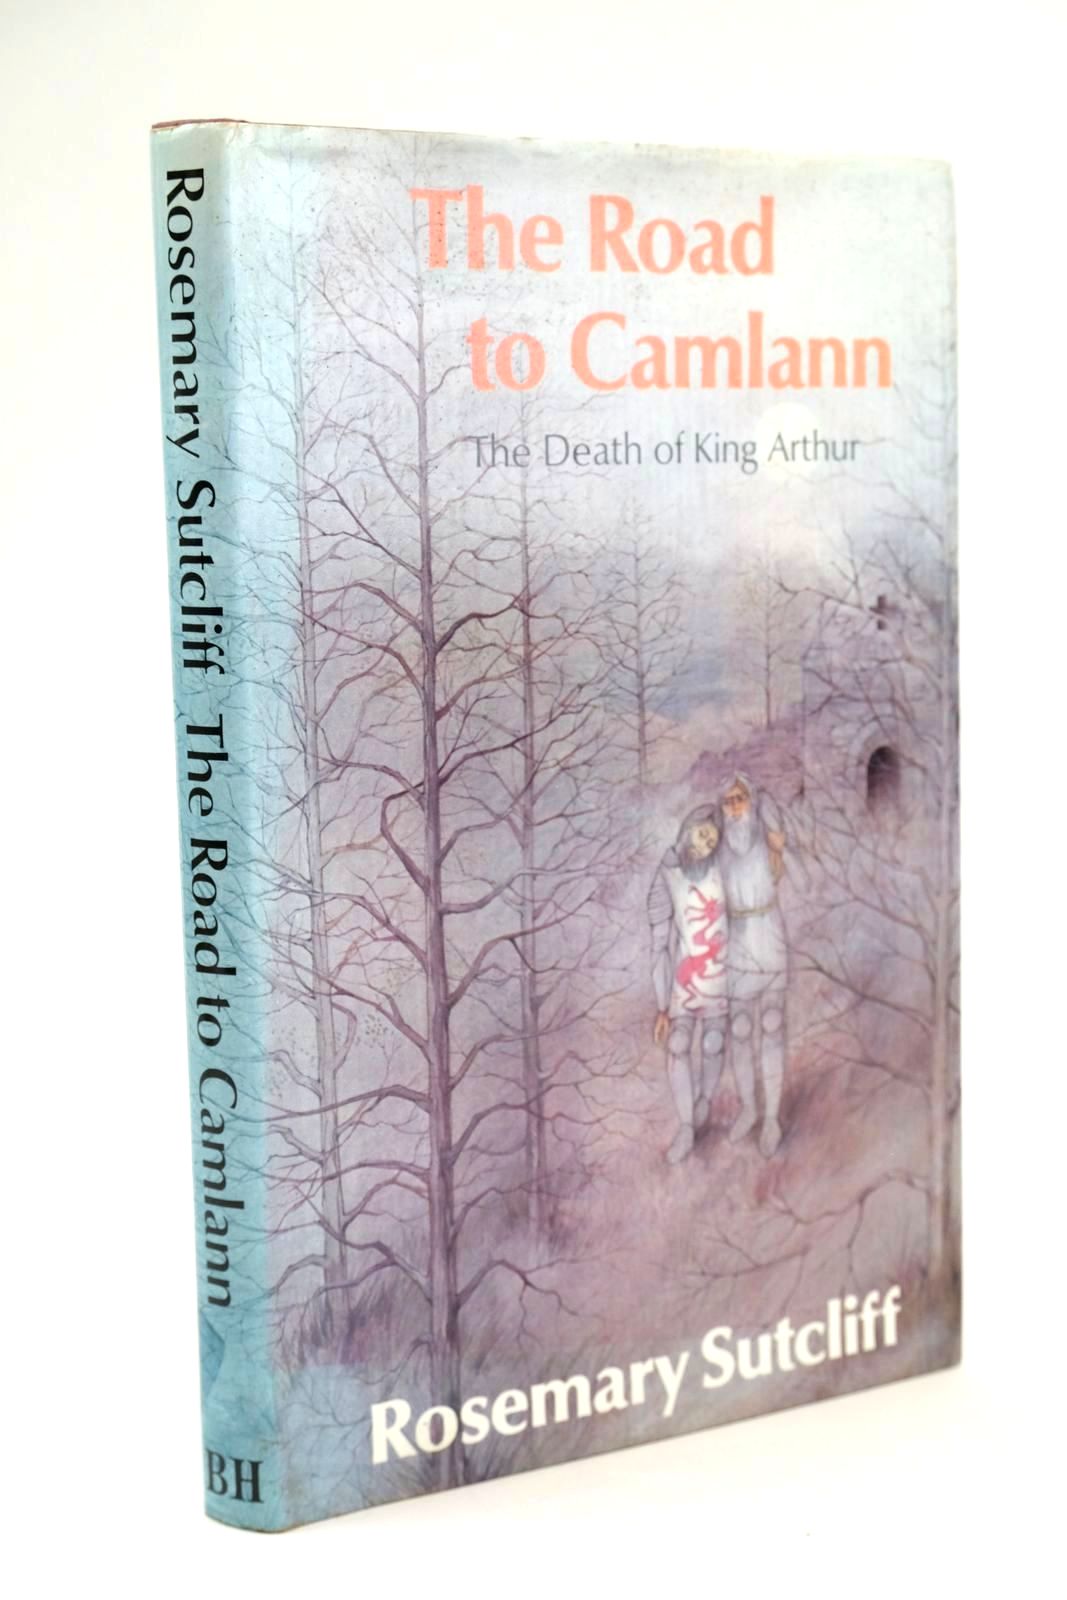 Photo of THE ROAD TO CAMLANN written by Sutcliff, Rosemary illustrated by Felts, Shirley published by The Bodley Head (STOCK CODE: 1325016)  for sale by Stella & Rose's Books